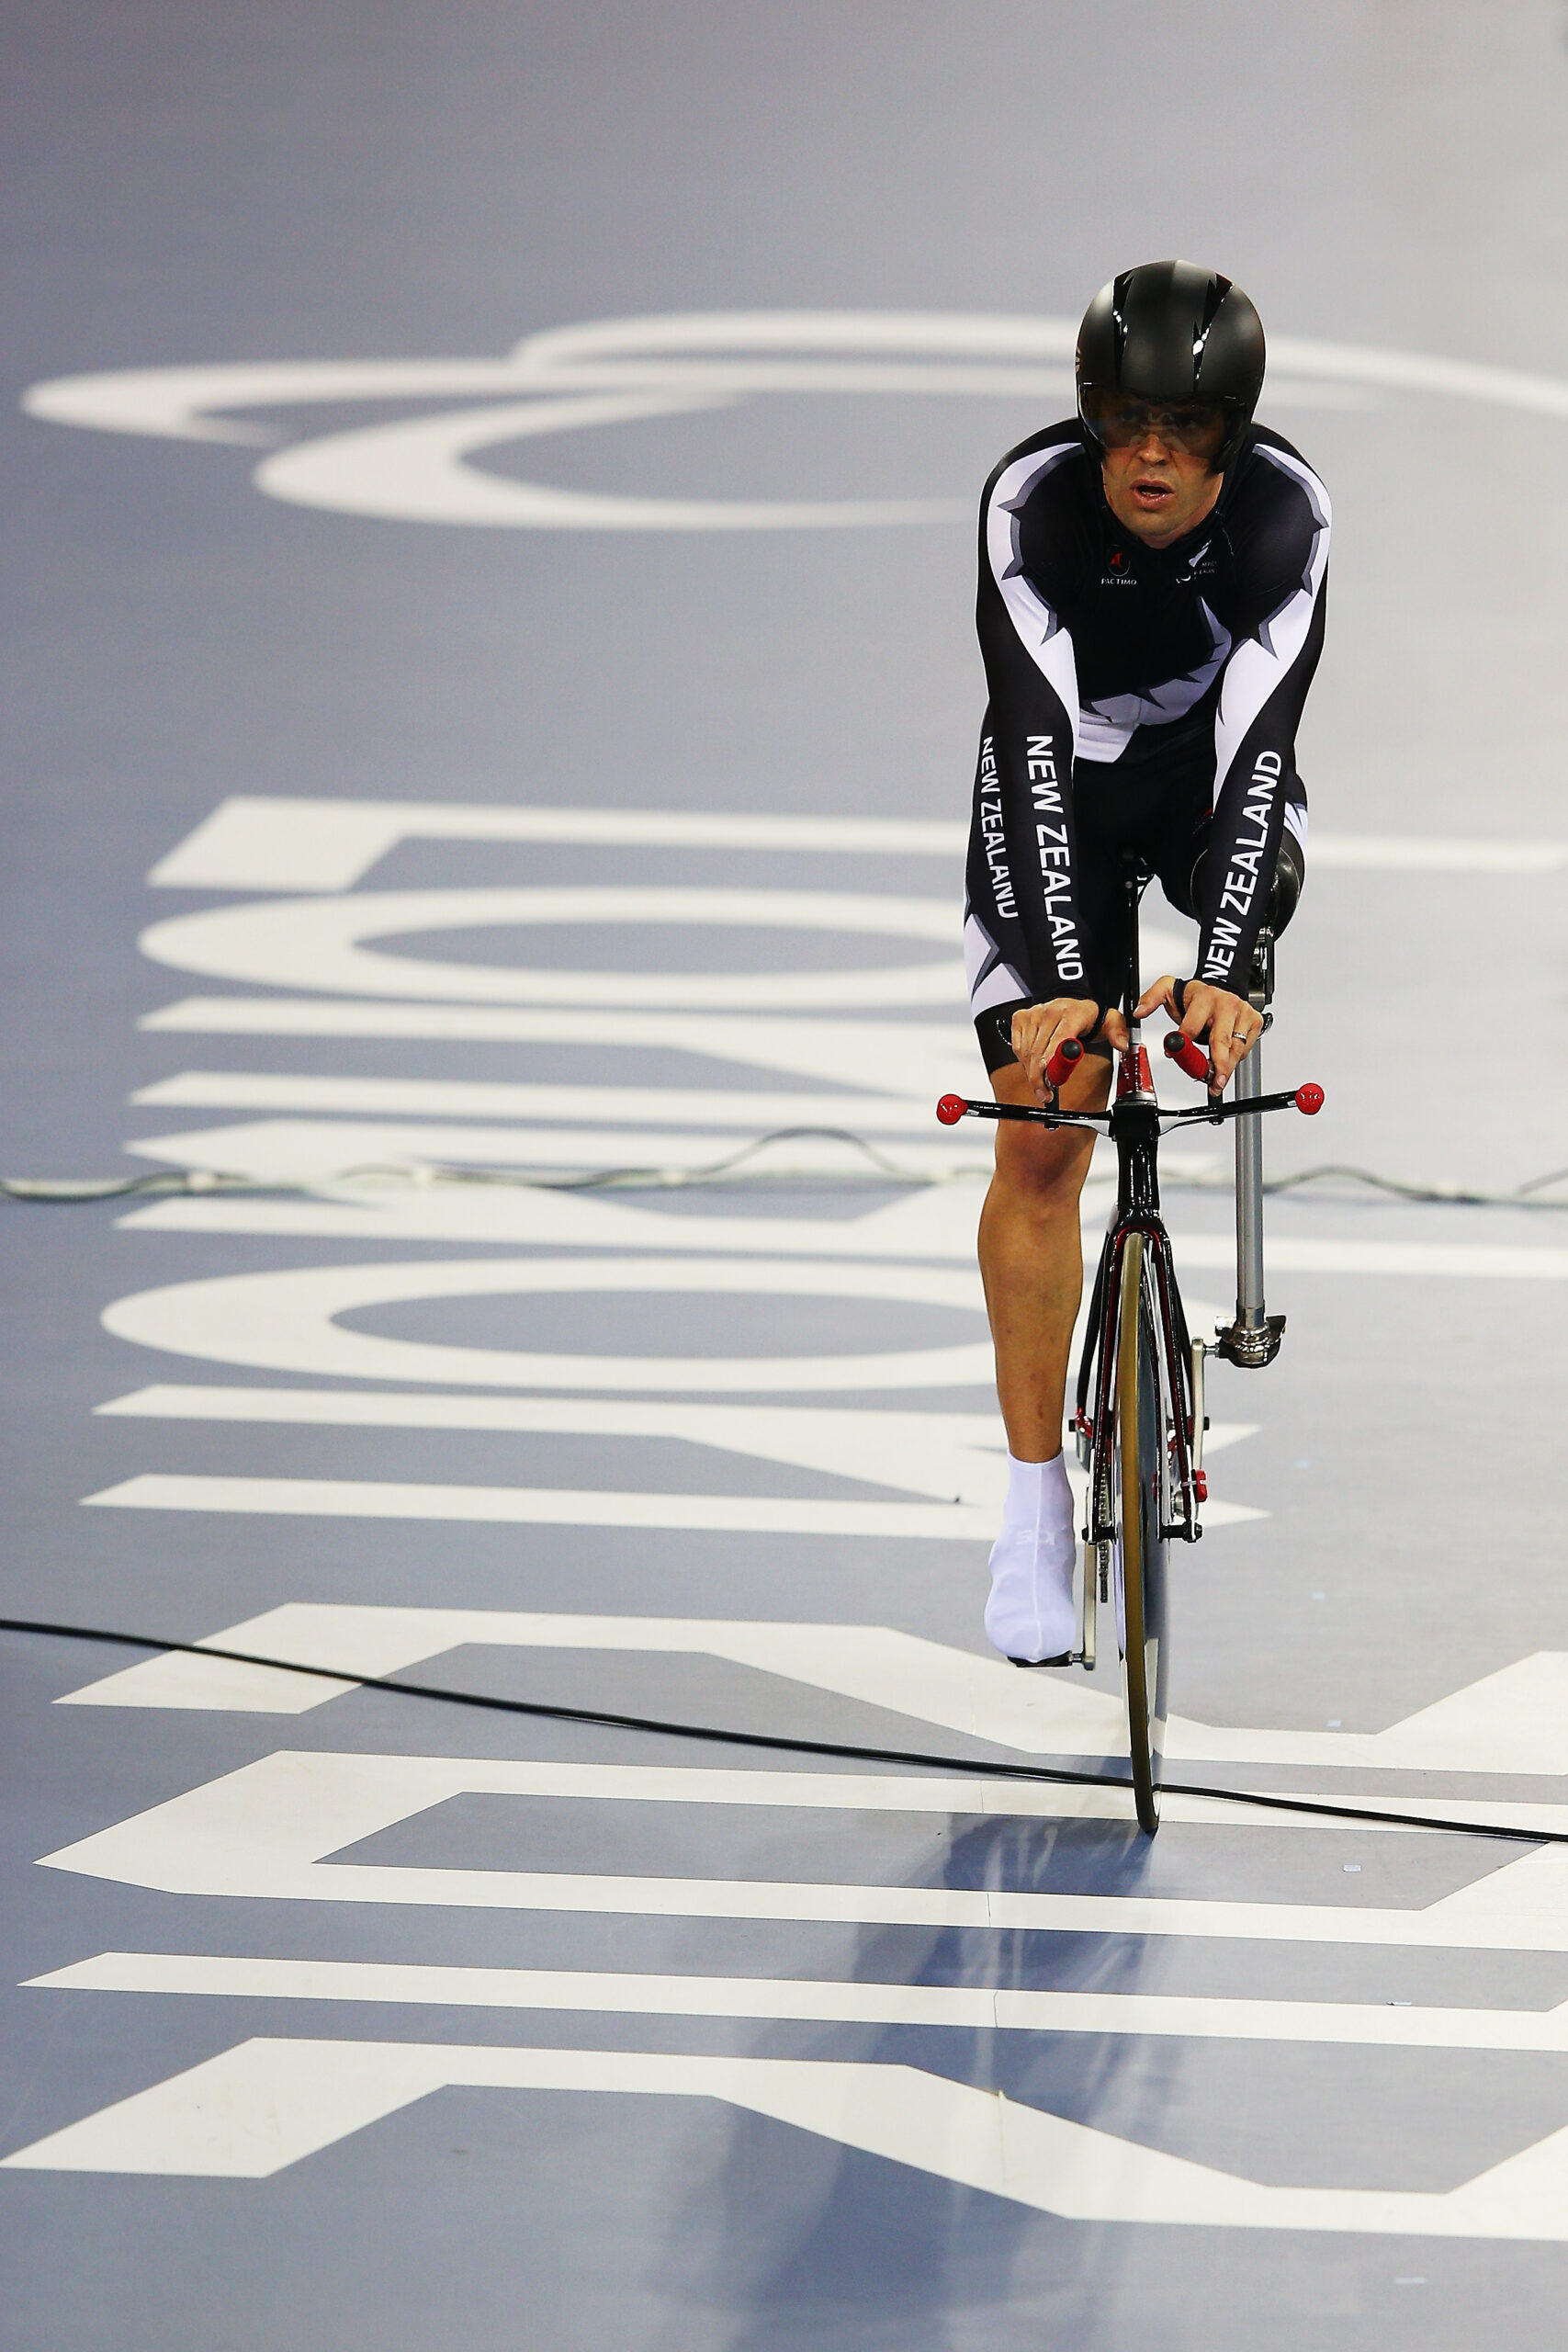 Nathan cycles over London 2012 on floor